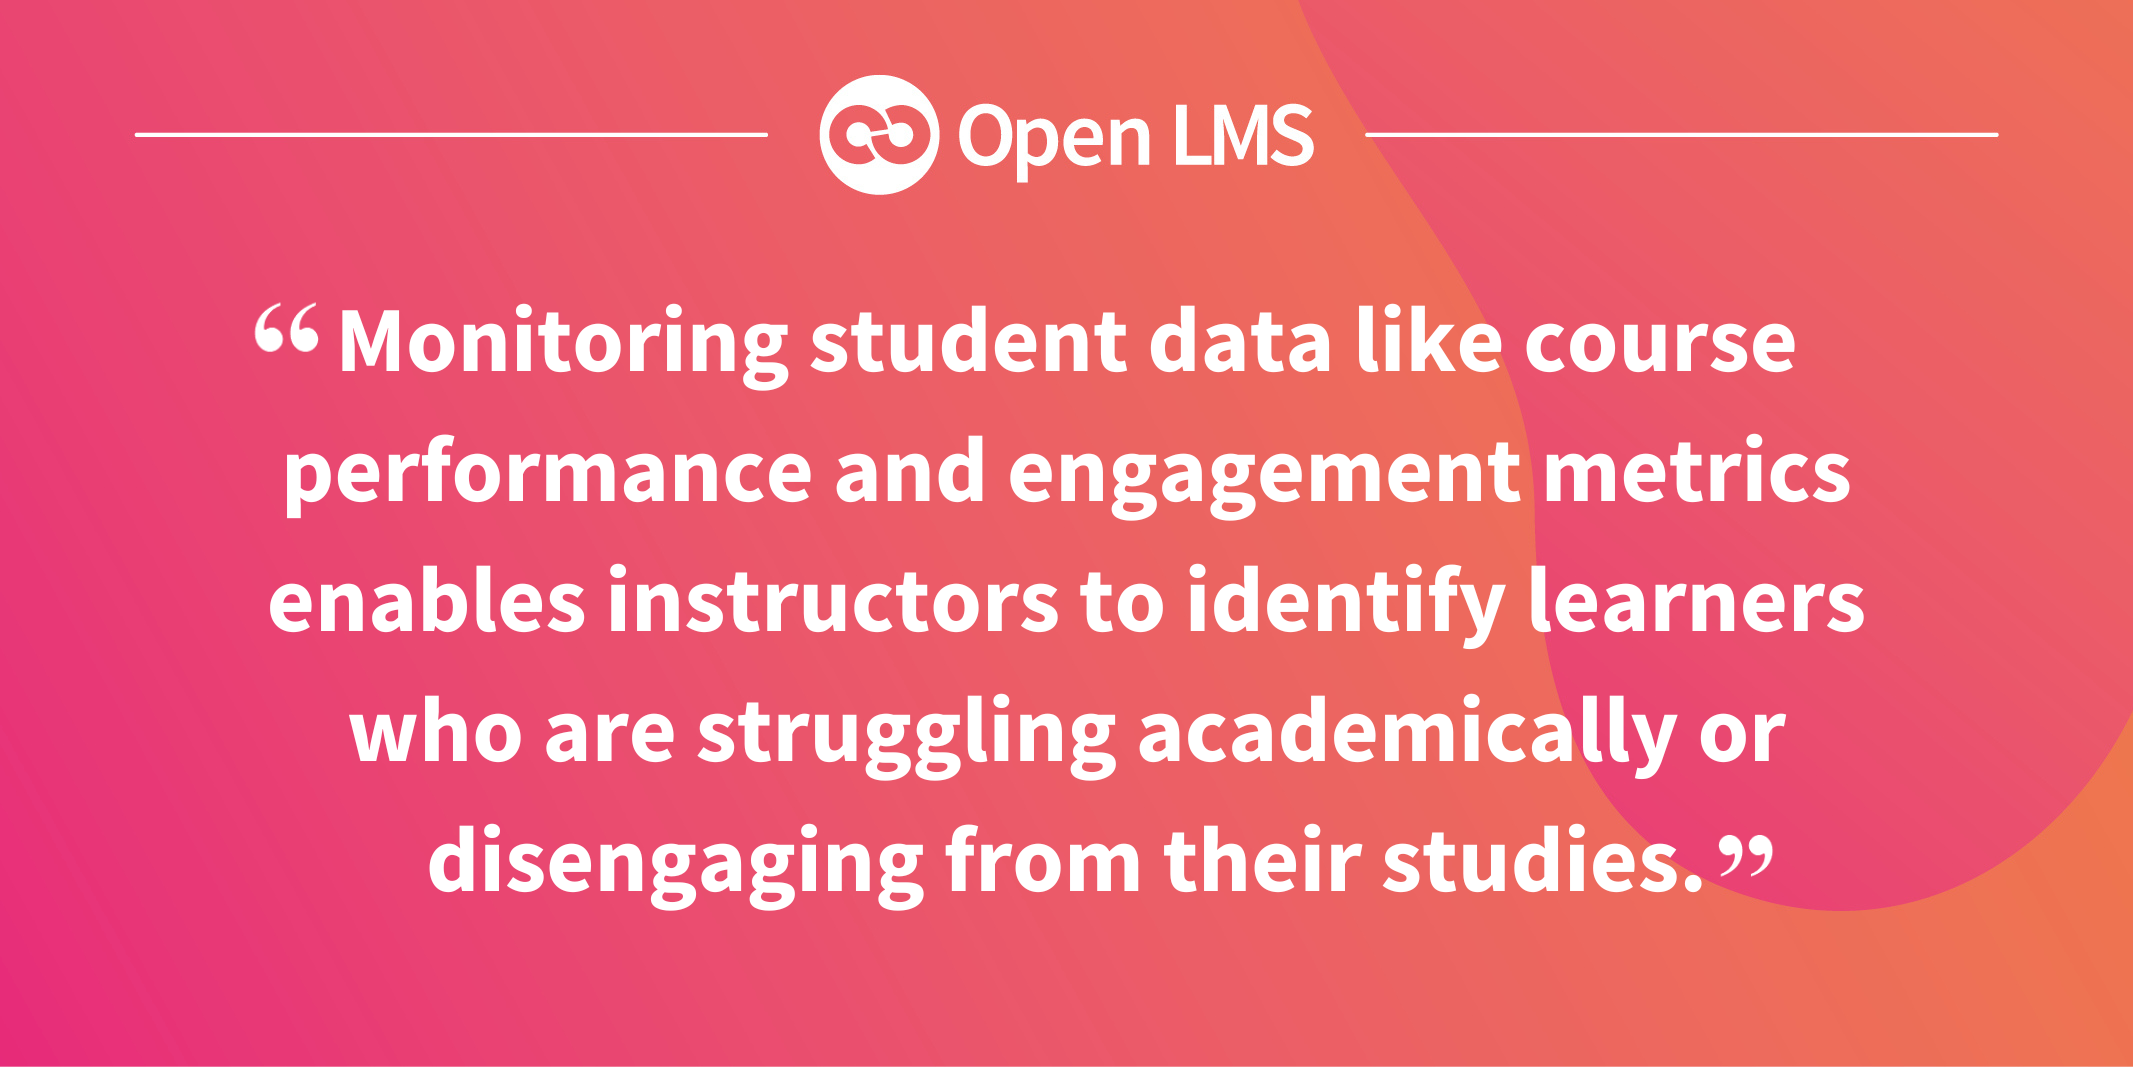 Monitoring student data like course performance and engagement metrics enables instructors to identify learners who are struggling academically or disengaging from their studies